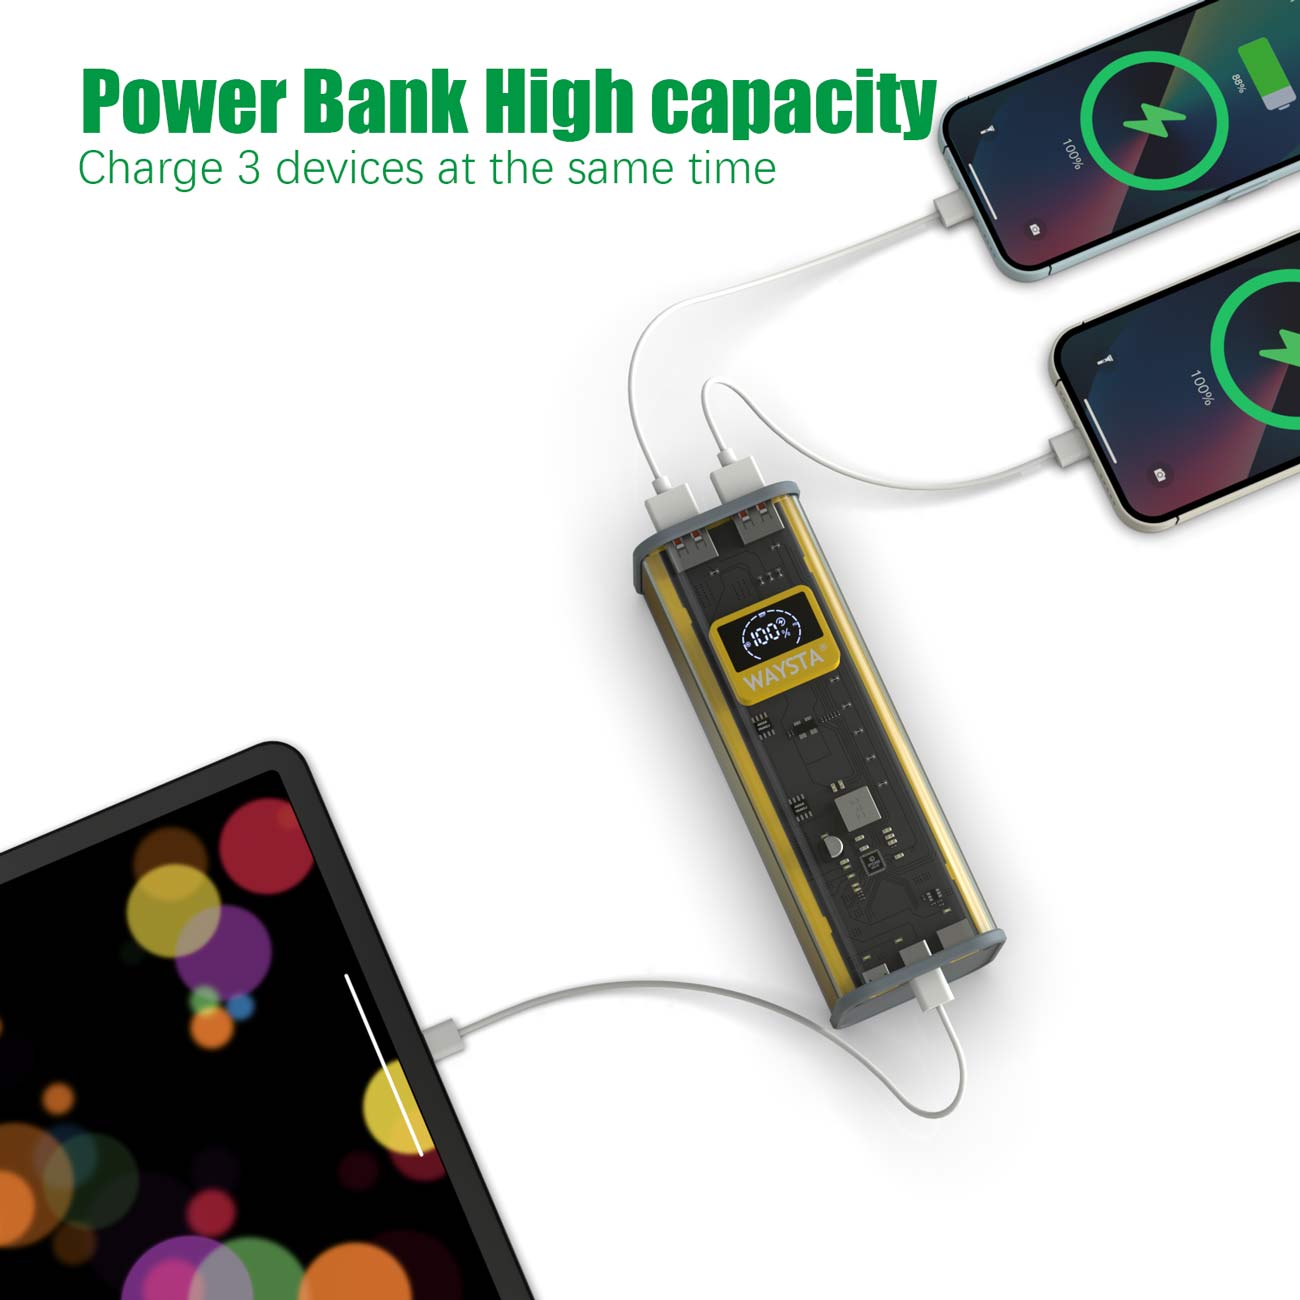 Power bank- 80000mAh, portable charger, Powerbank support QC 3.0 22.5W and PD 20W fast charging, with digital smart display, compatible with mobile phones, cameras, speakers,etc.